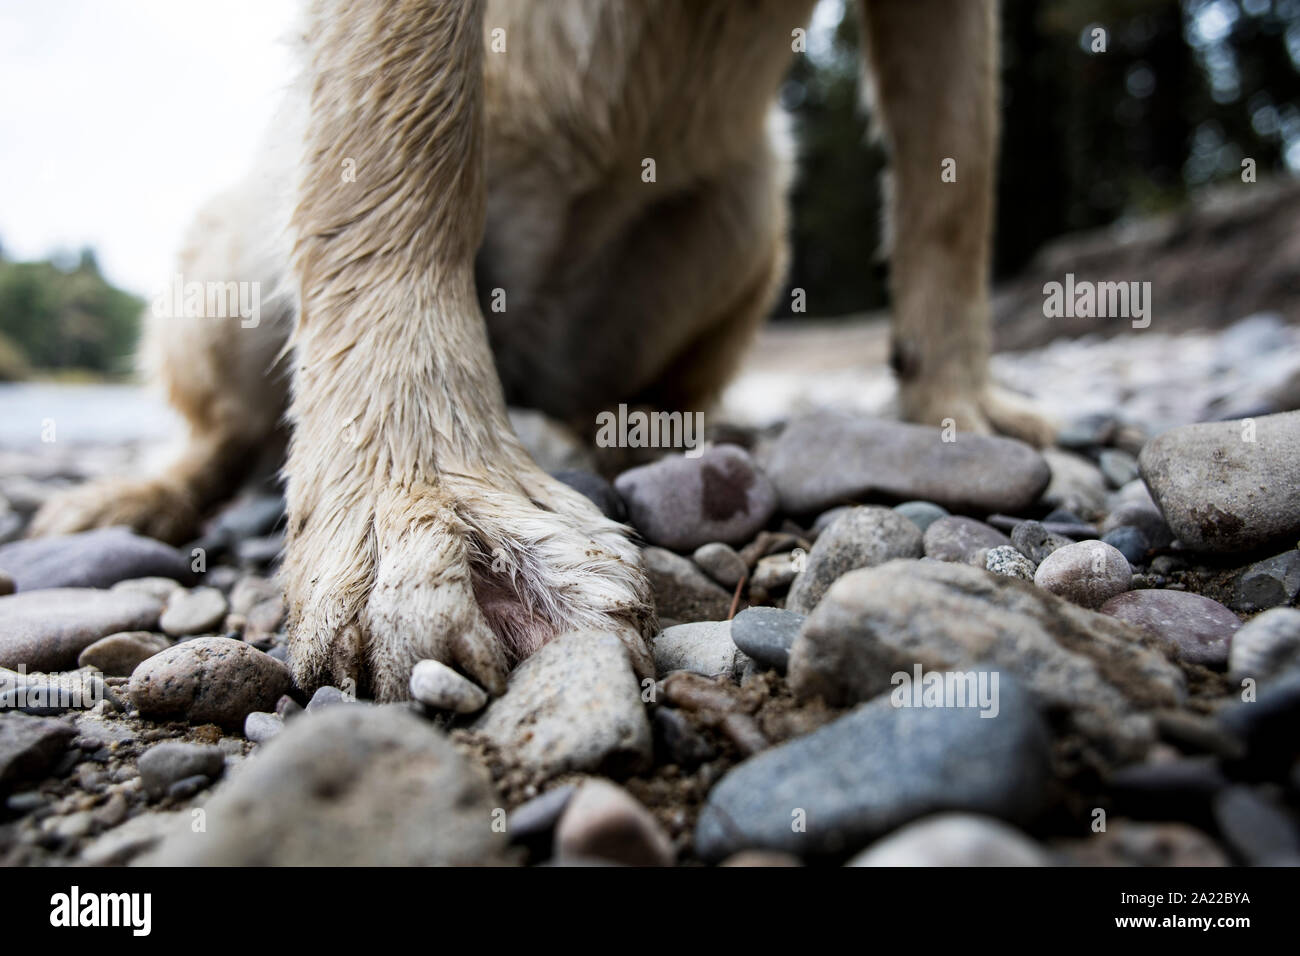 A wet dog paw on the side of the Bitterroot River near Missoula. Stock Photo